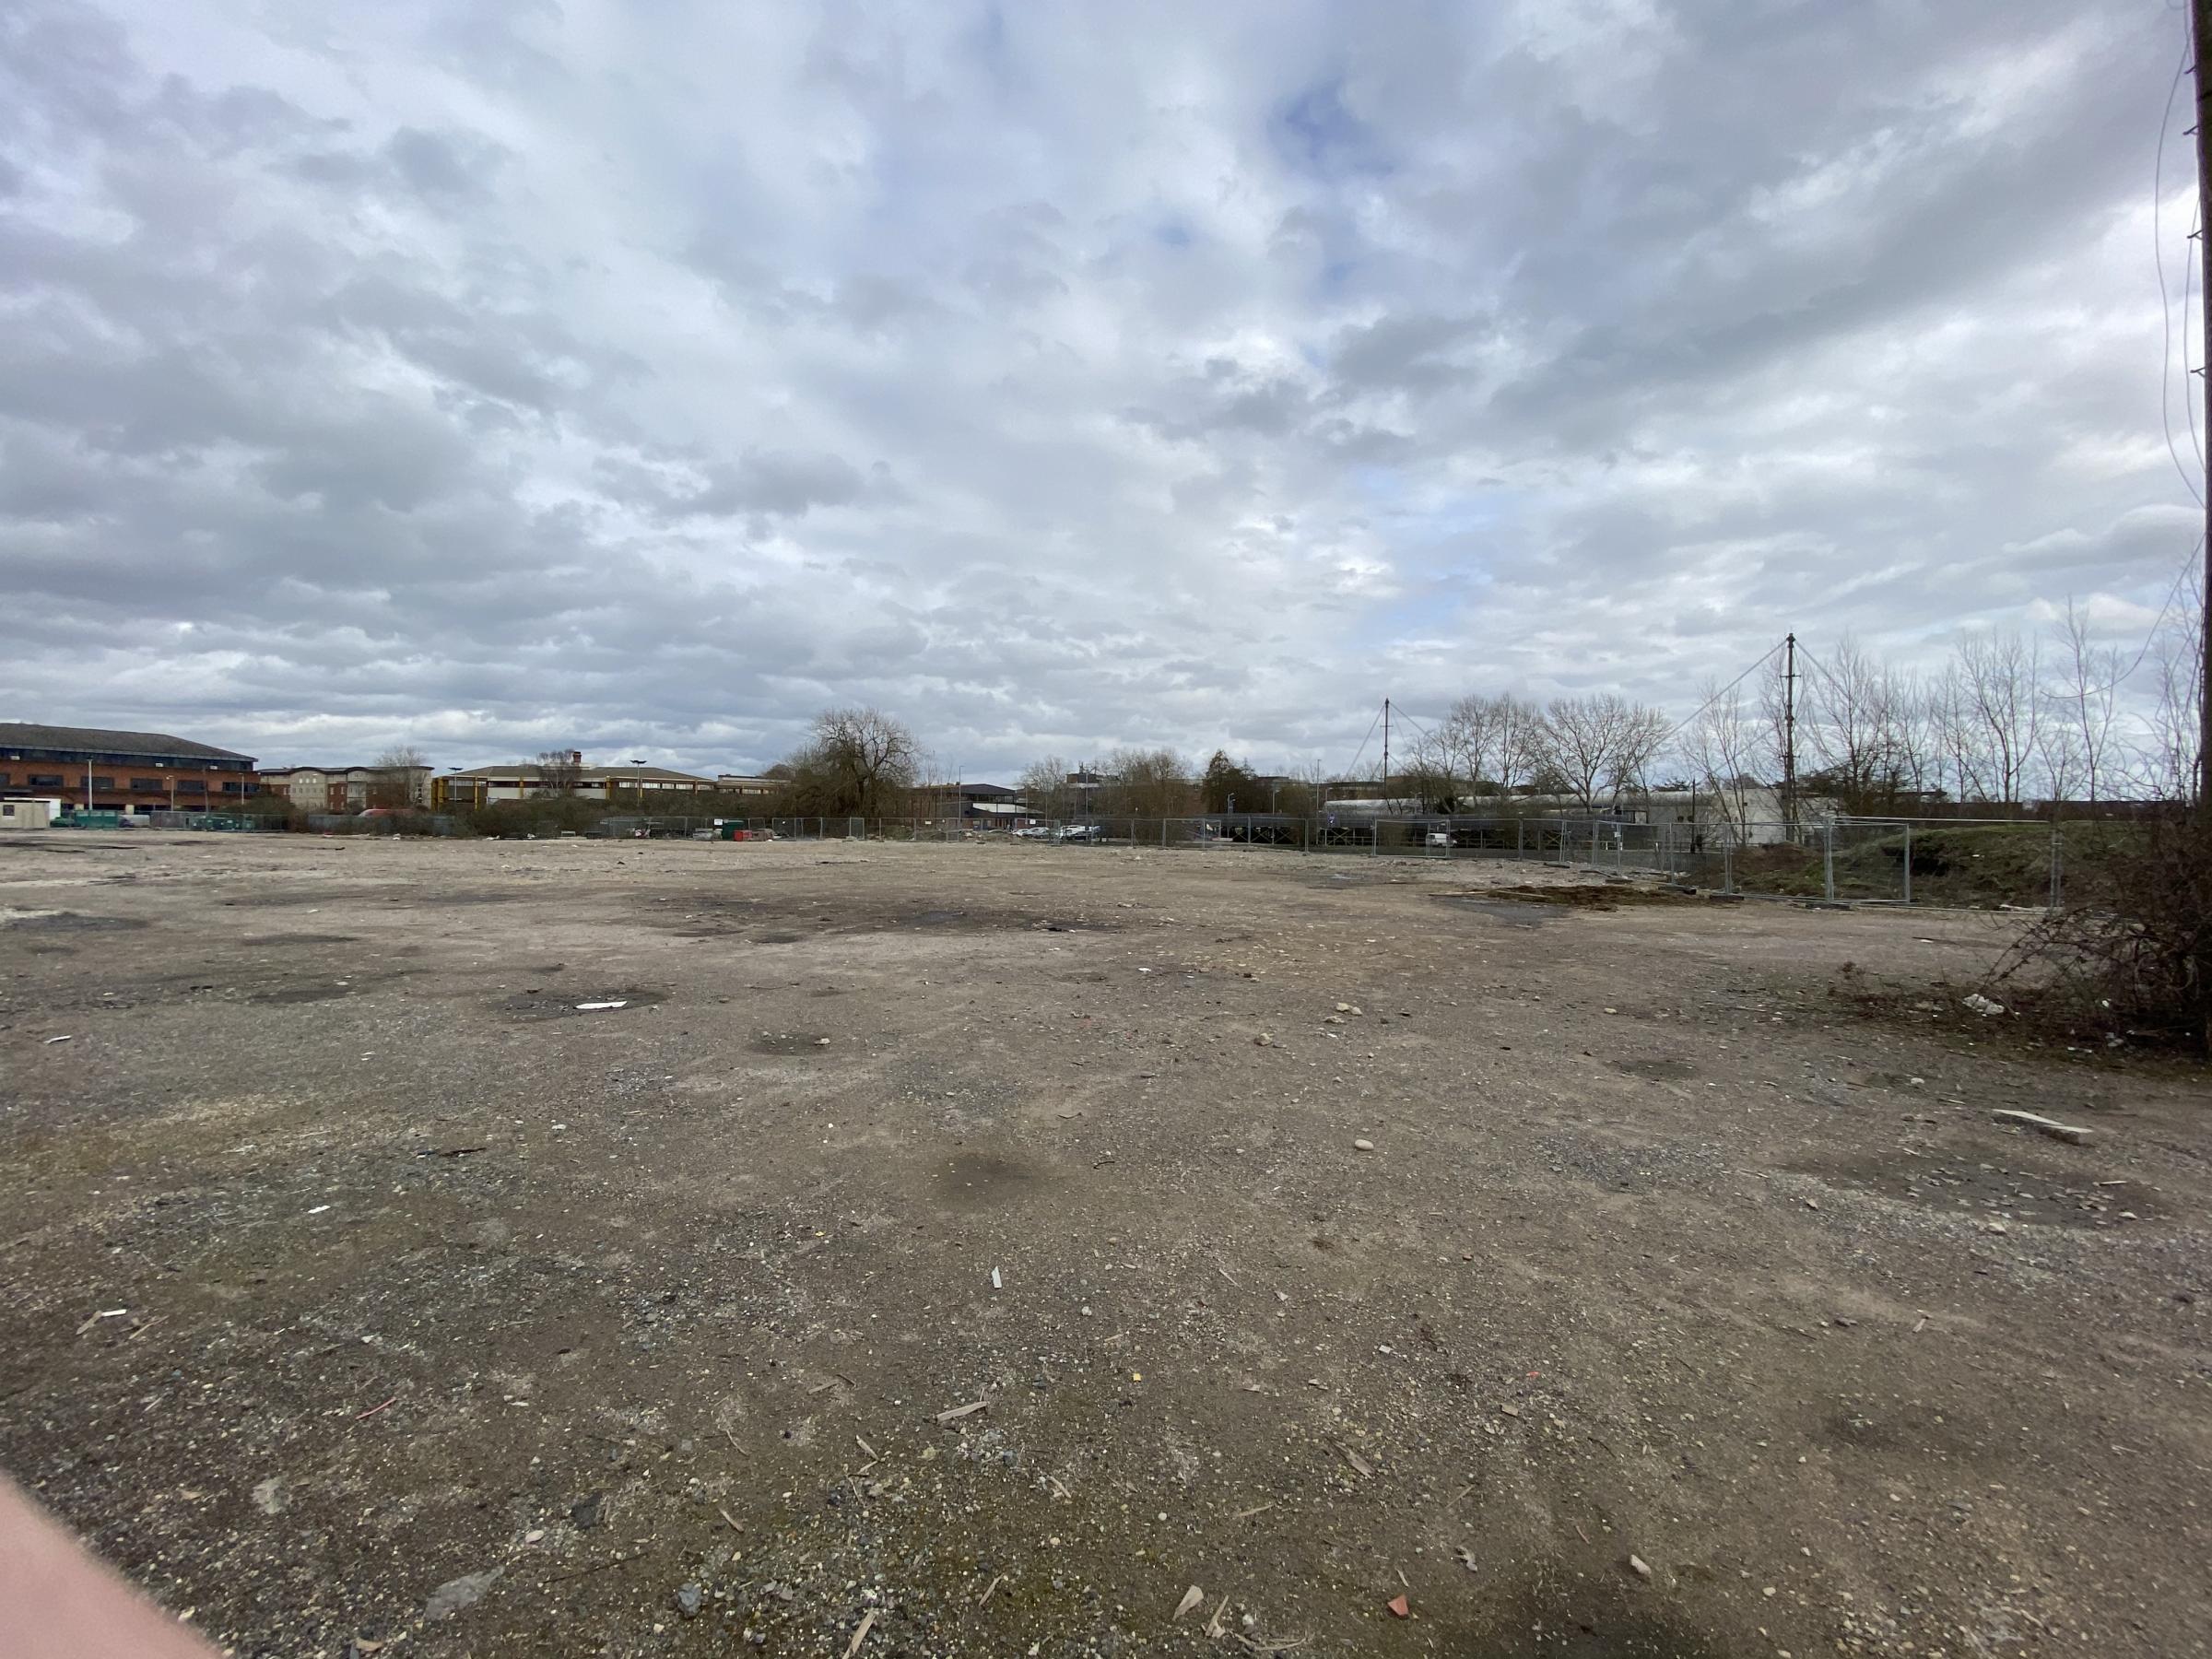 Land at Oxpens ready for development Picture: OxWED